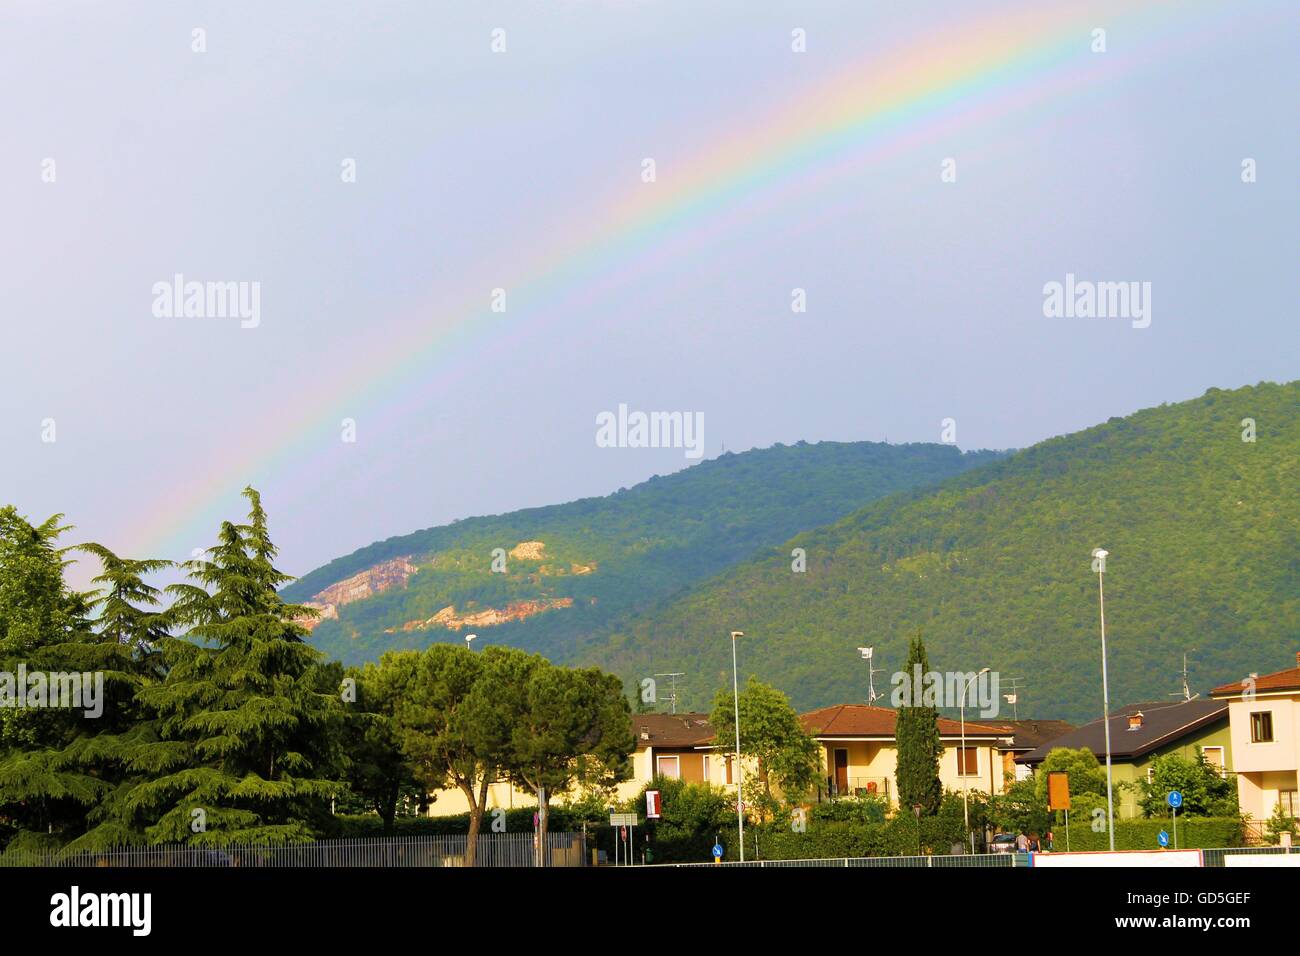 Sky with rainbow and mountains background Stock Photo